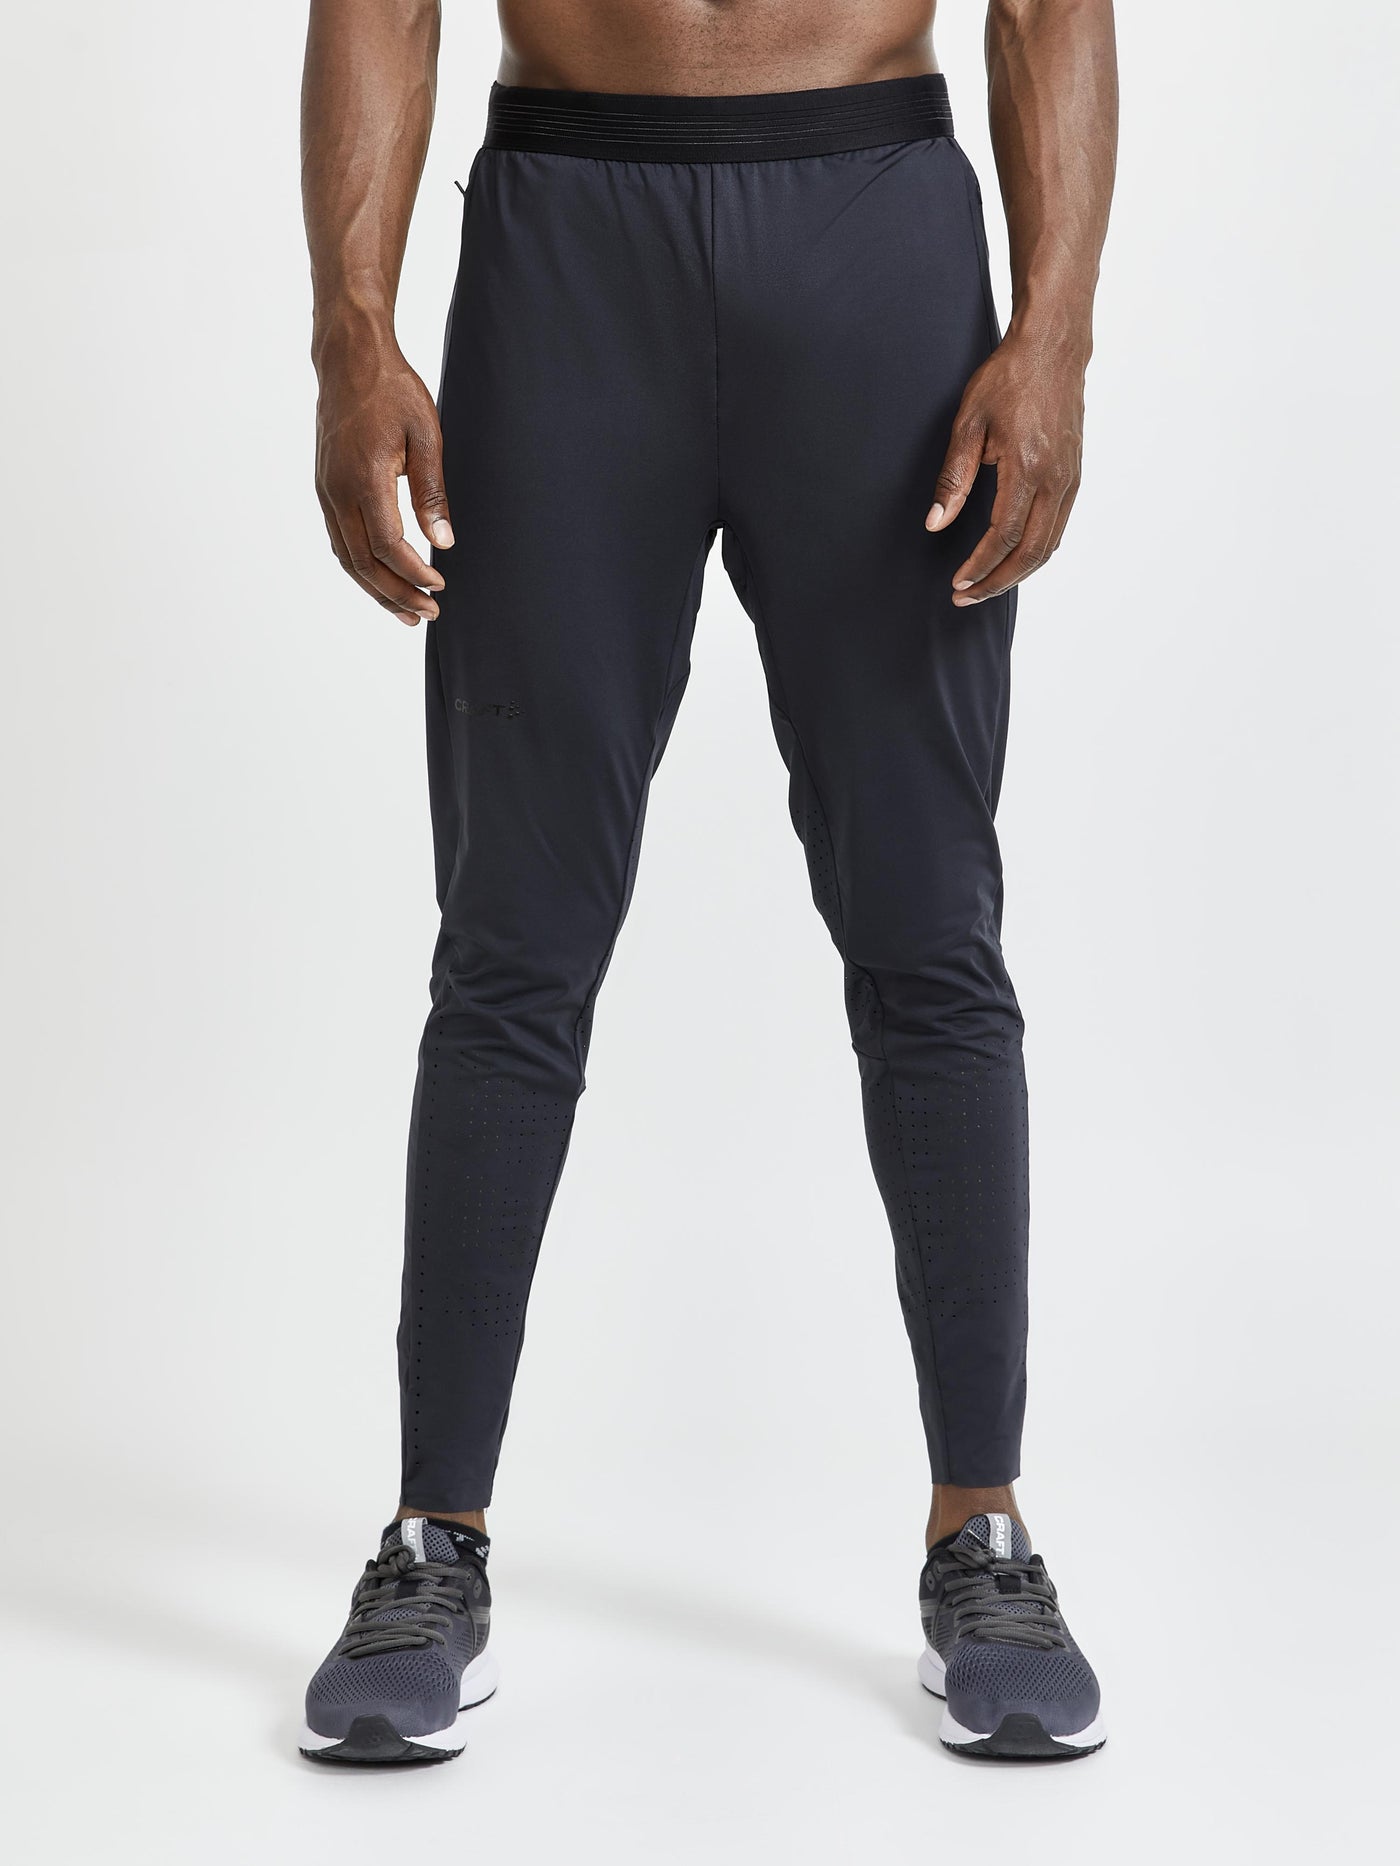 MEN'S PRO HYPERVENT RUNNING PANTS Men's Pants and Tights Craft Sportswear NA